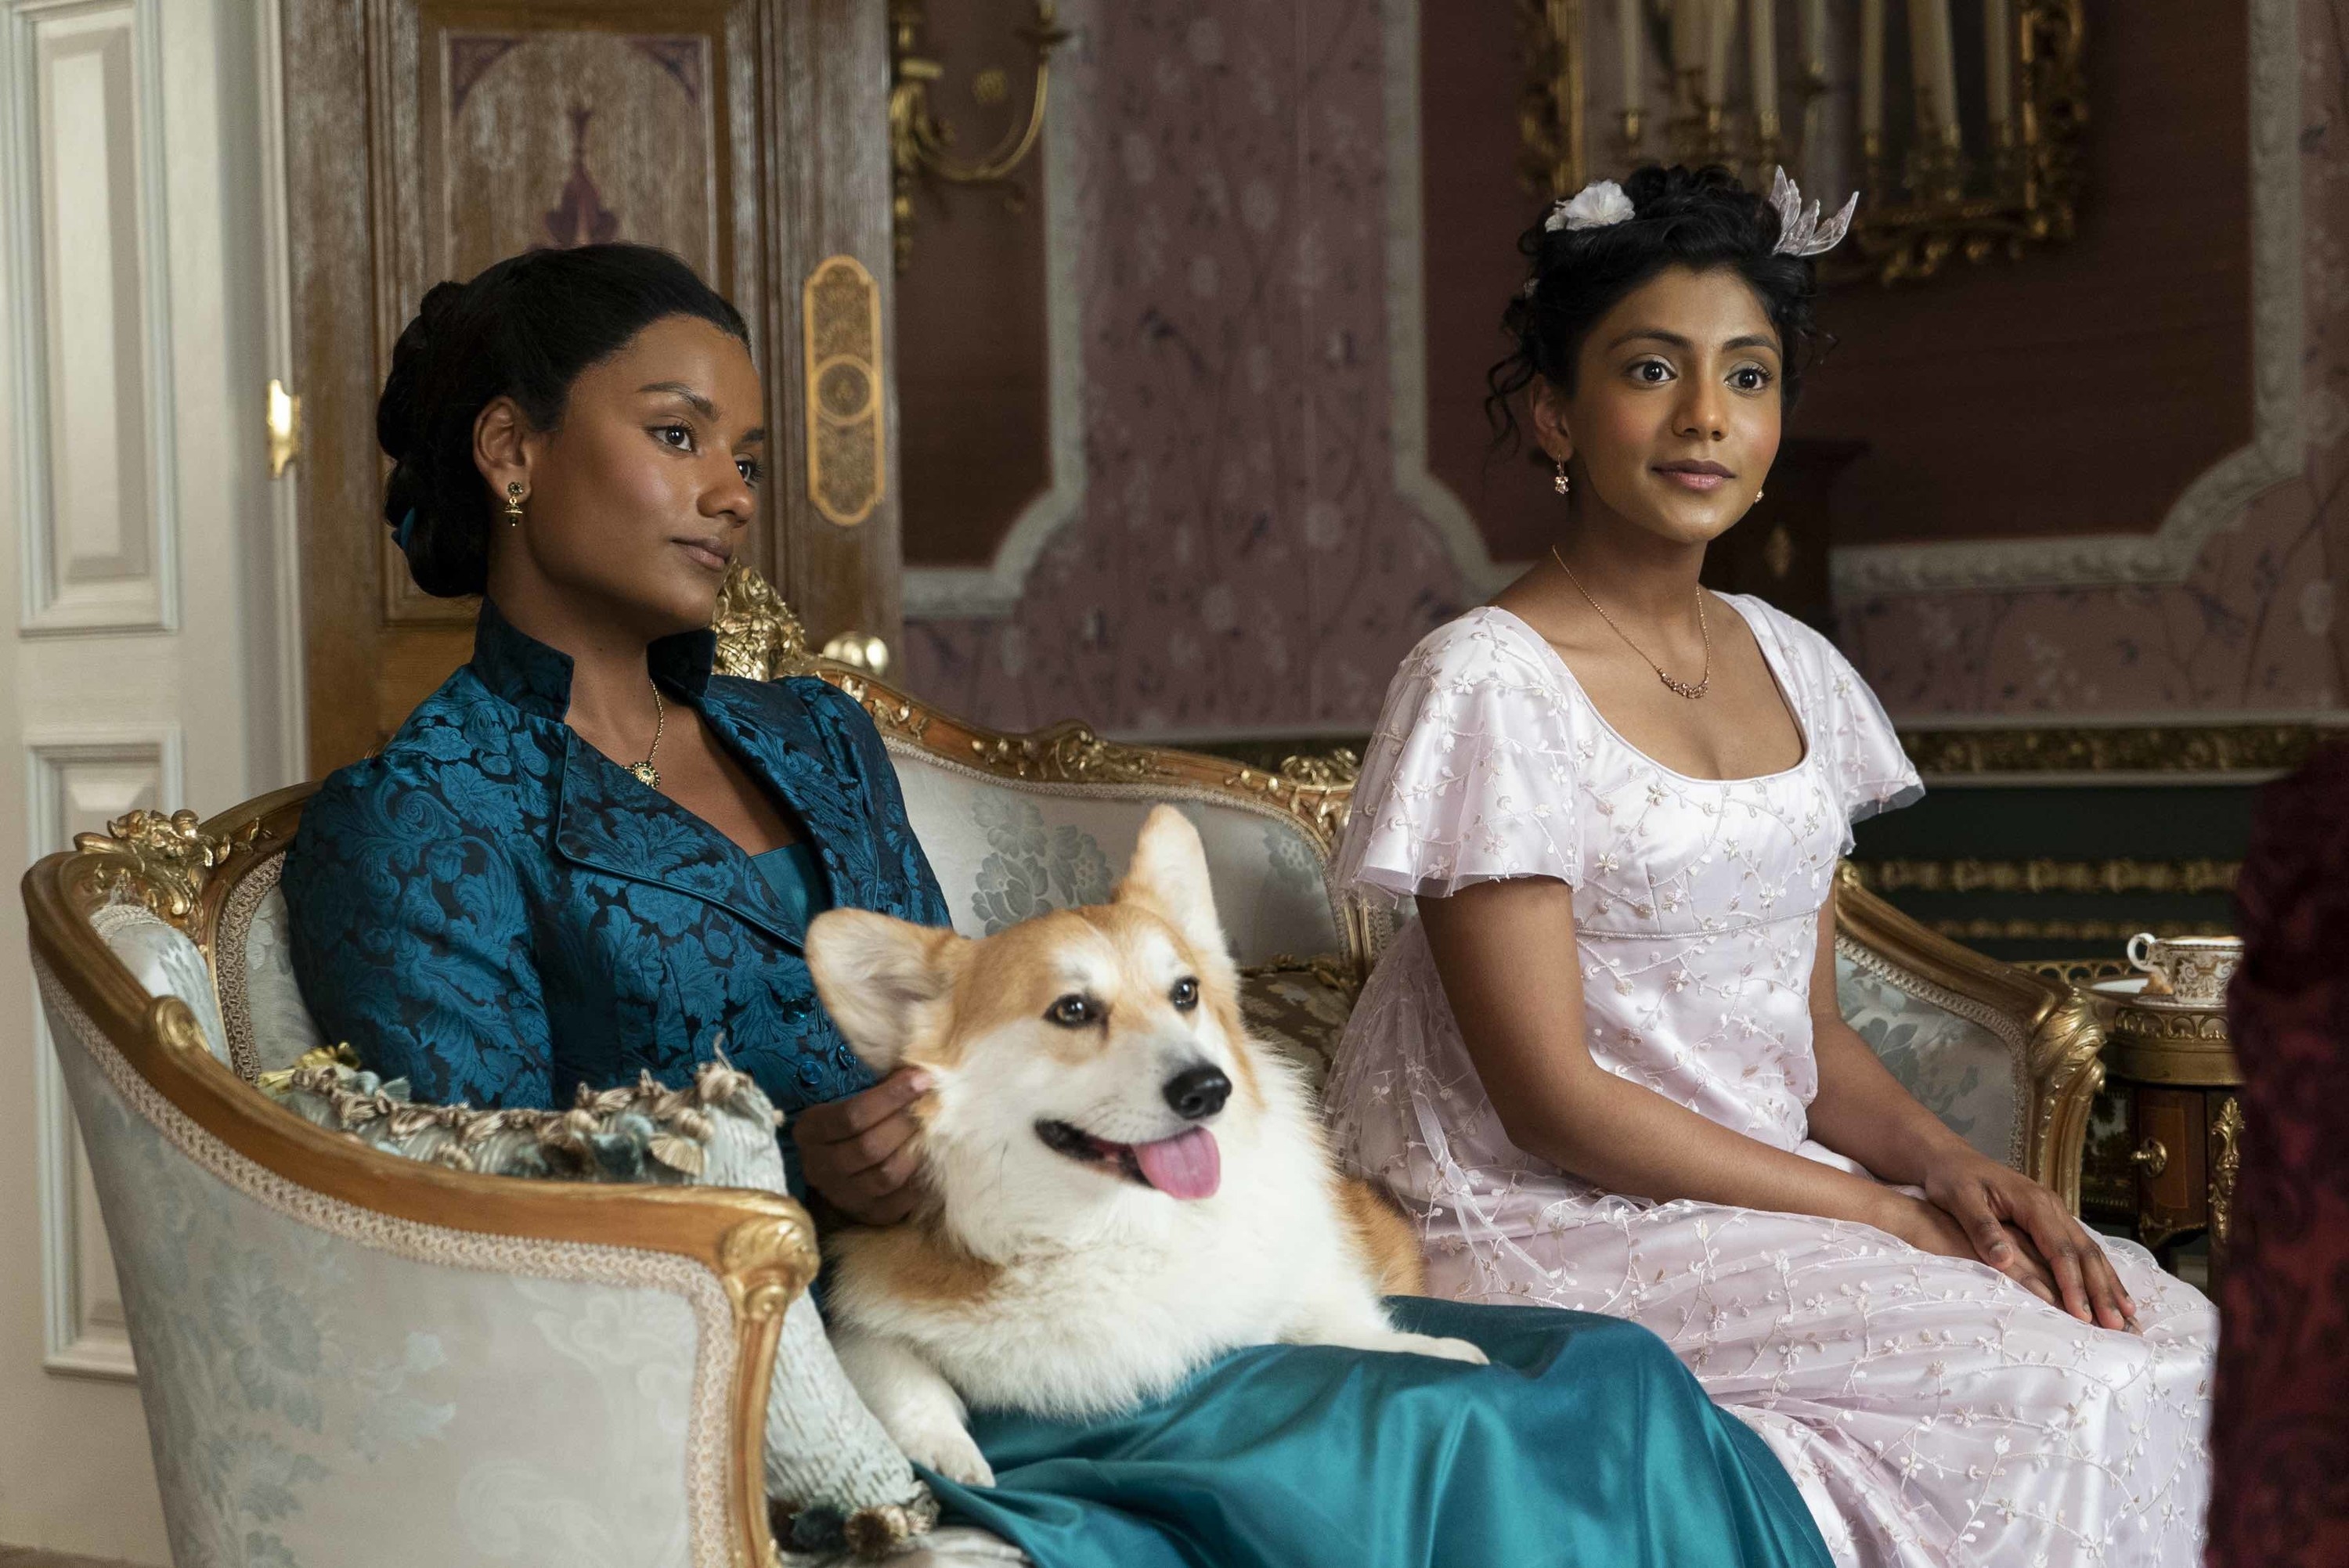 Kate, Edwina, and the Corgi sitting on an ornately decorated couch